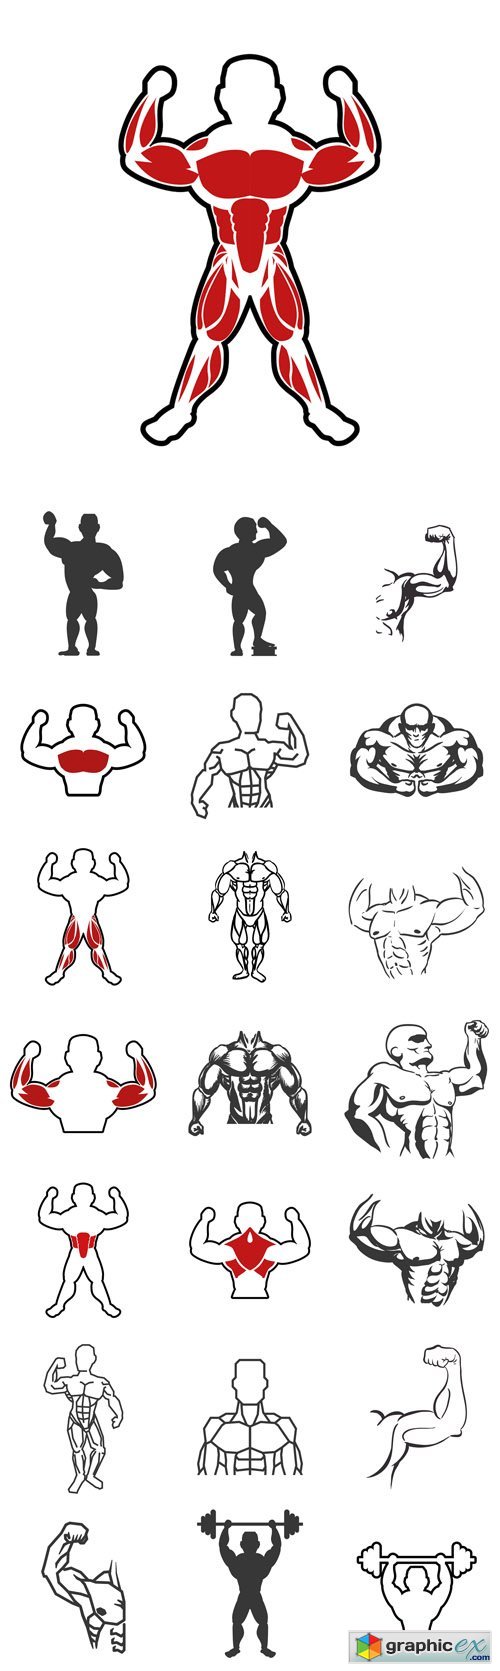 Healthy lifestyle and bodybuilder concept represented by Muscle man icon